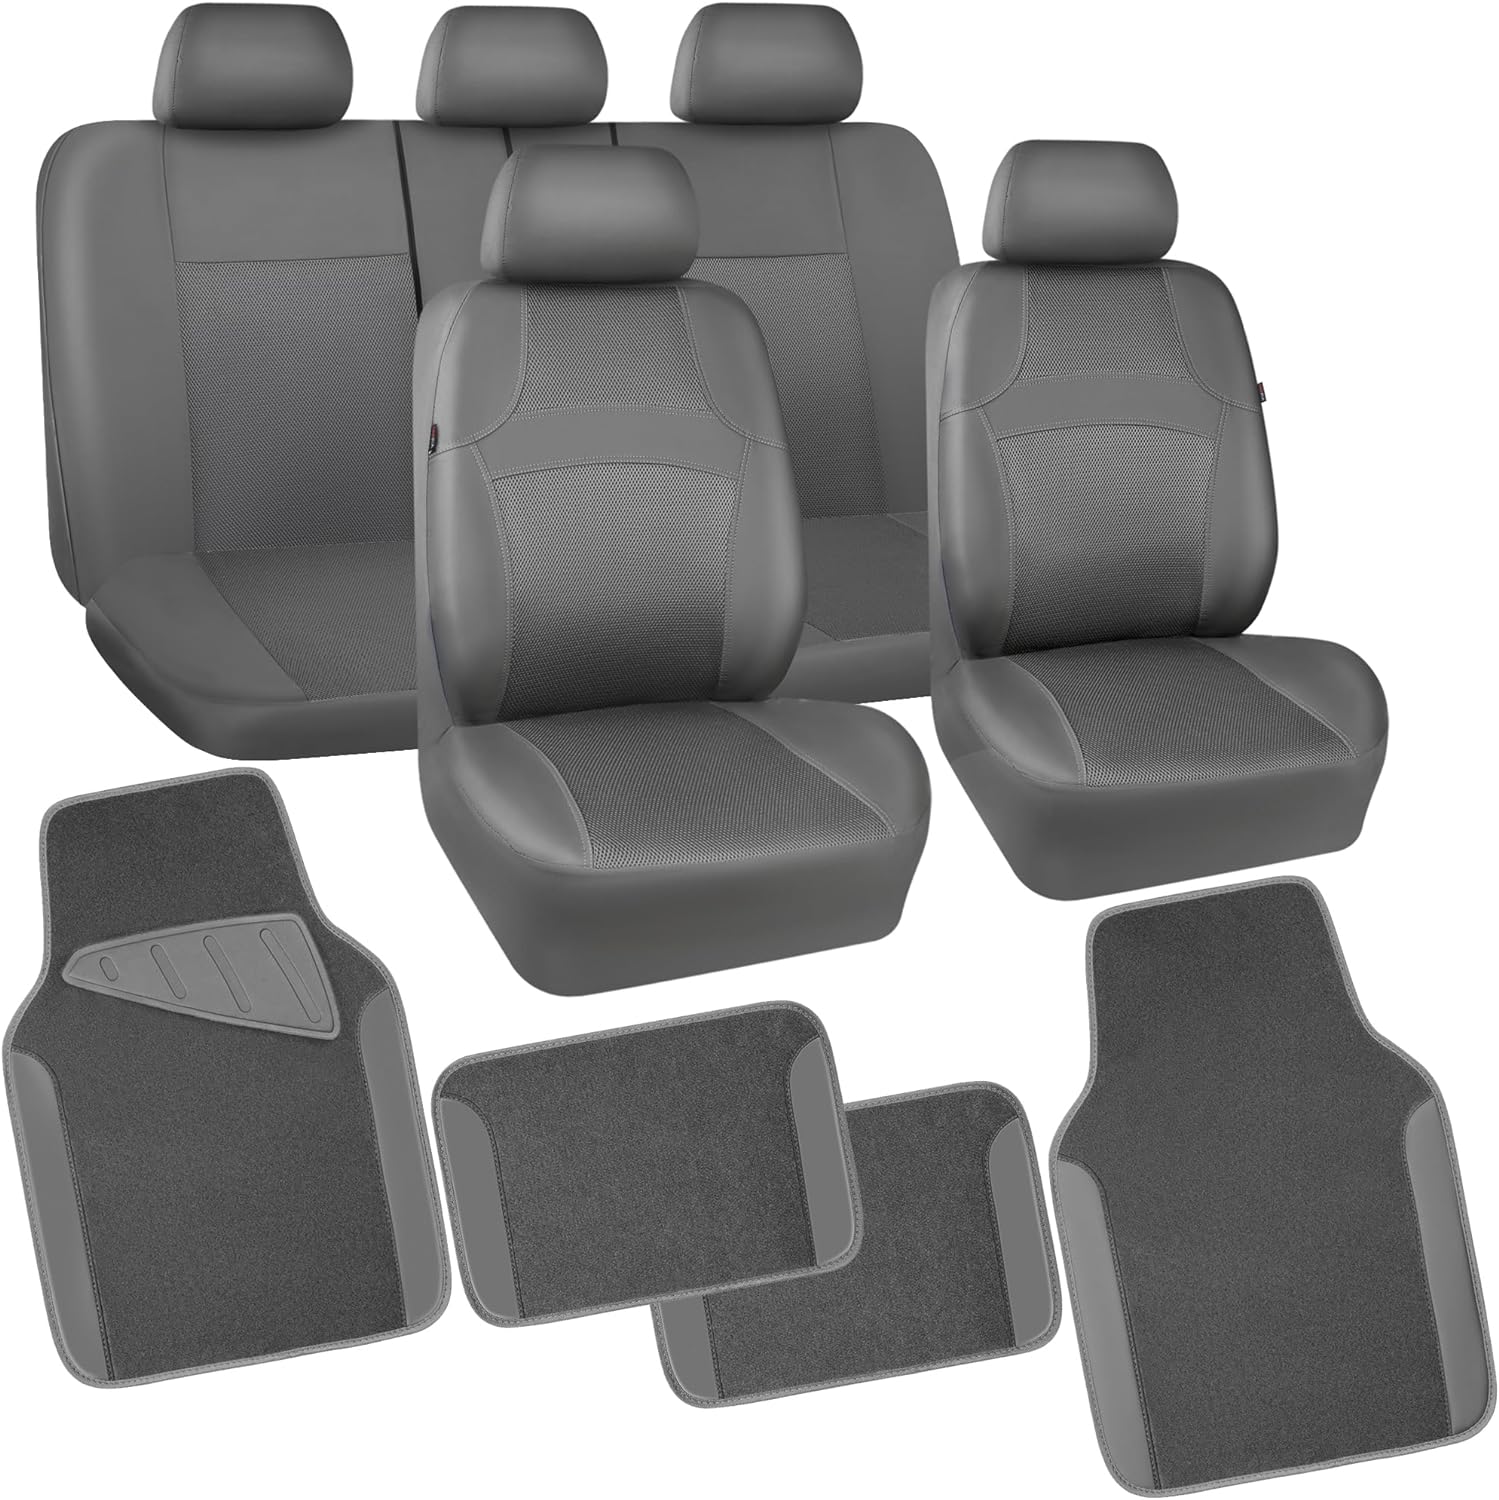 CAR PASS Leather Car Seat Covers & Car Floor Mats,Universal Fit for SUV Sedan Truck,Mesh w/ 5m Sponge,Airbag Compatible Automotive Interior Covers (Full Sets Combo Set, Black Charcoal Gray)